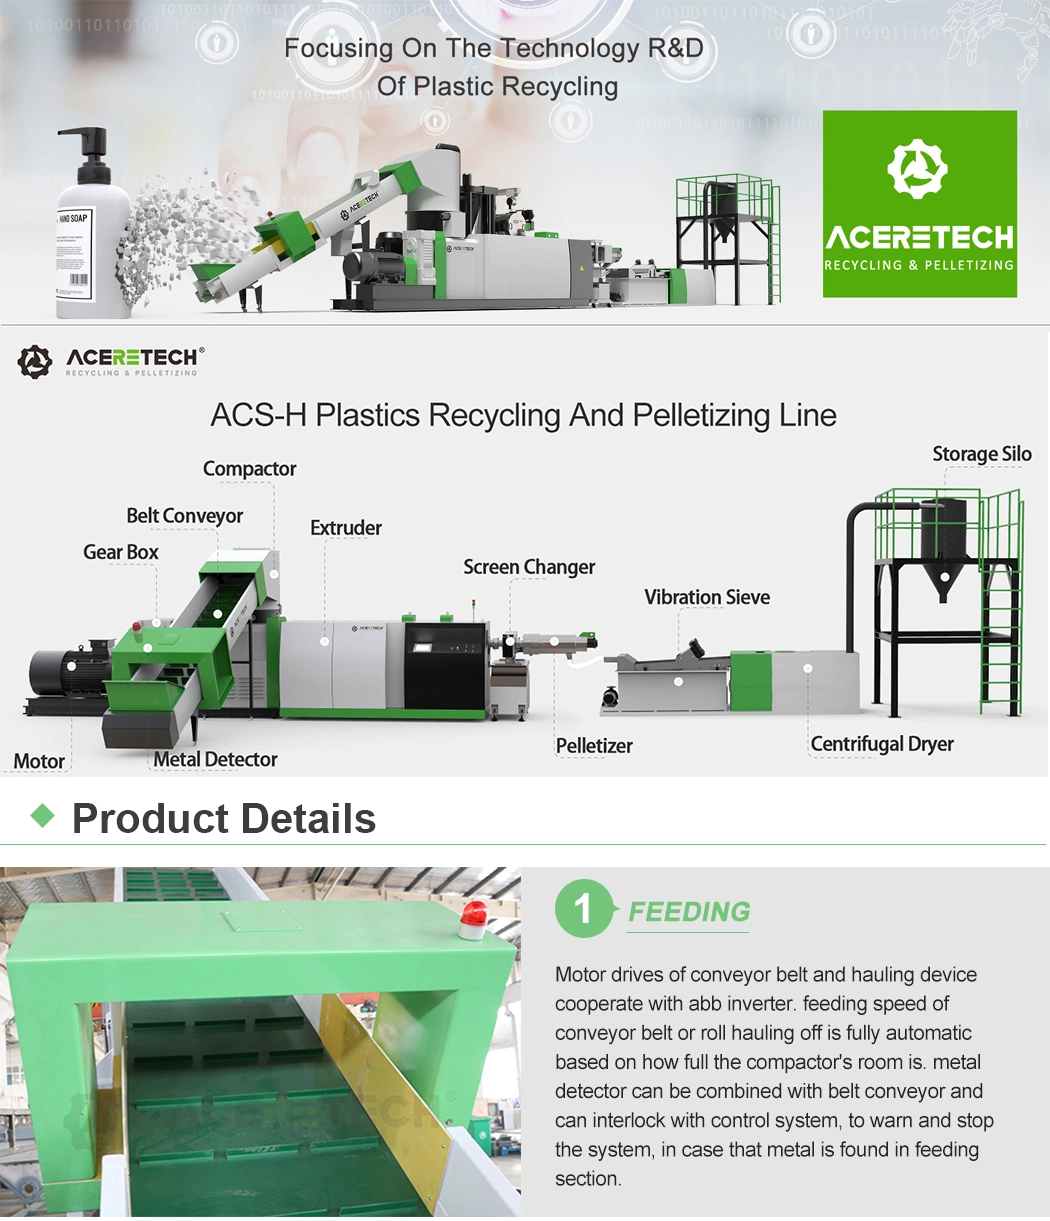 Aceretech Famous Brand Motor Pet Recycle Fiber Machinery with Wear Resistant Accessories